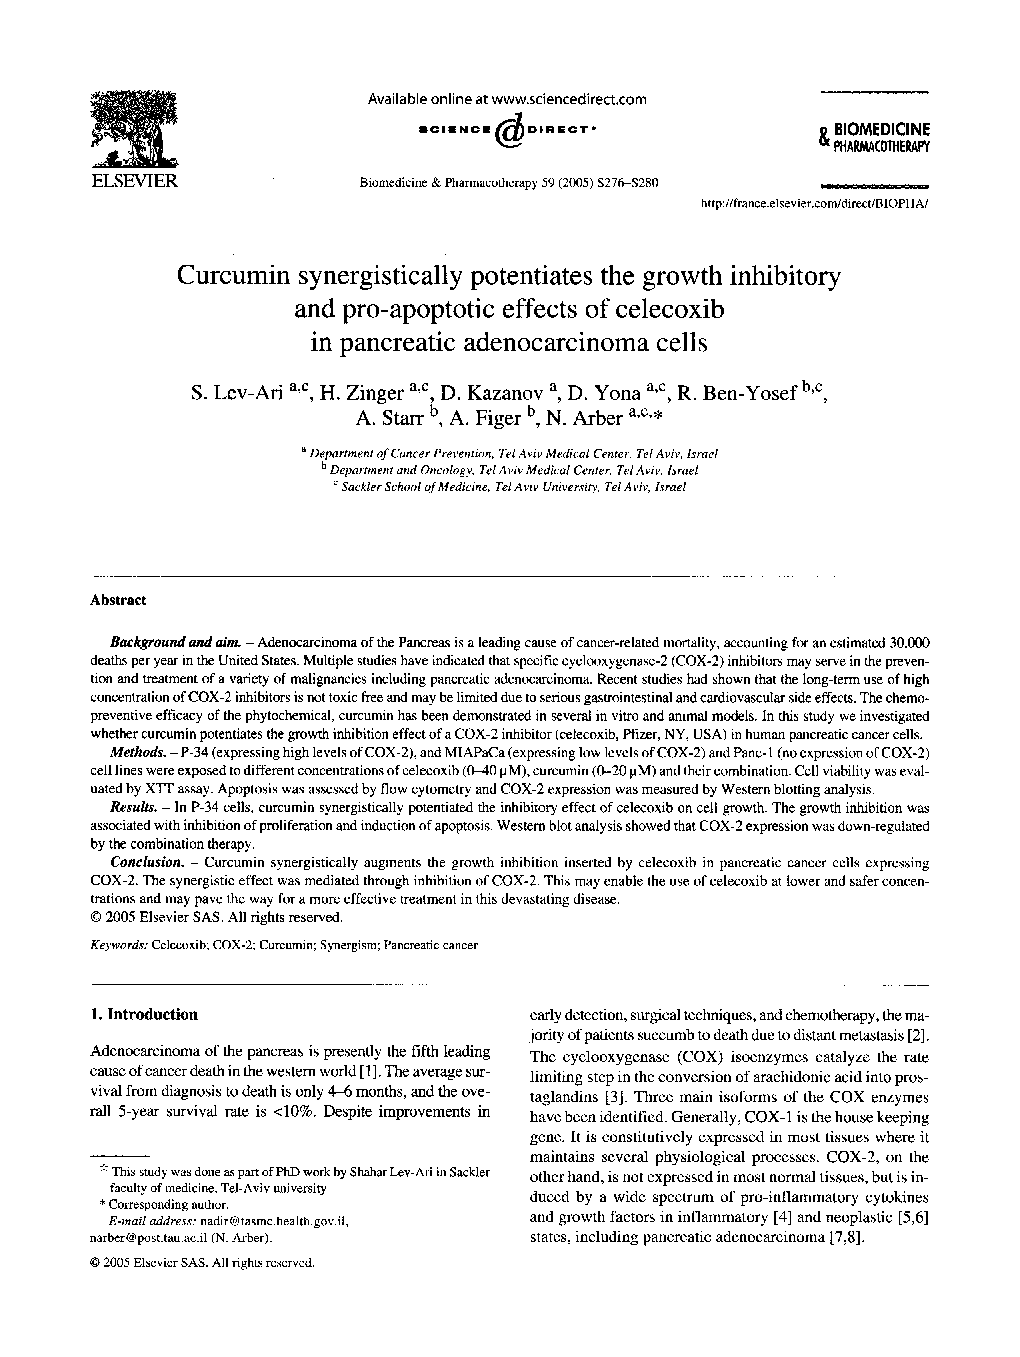 Curcumin synergistically potentiates the growth inhibitory and pro-apoptotic effects of celecoxib in pancreatic adenocarcinoma cells